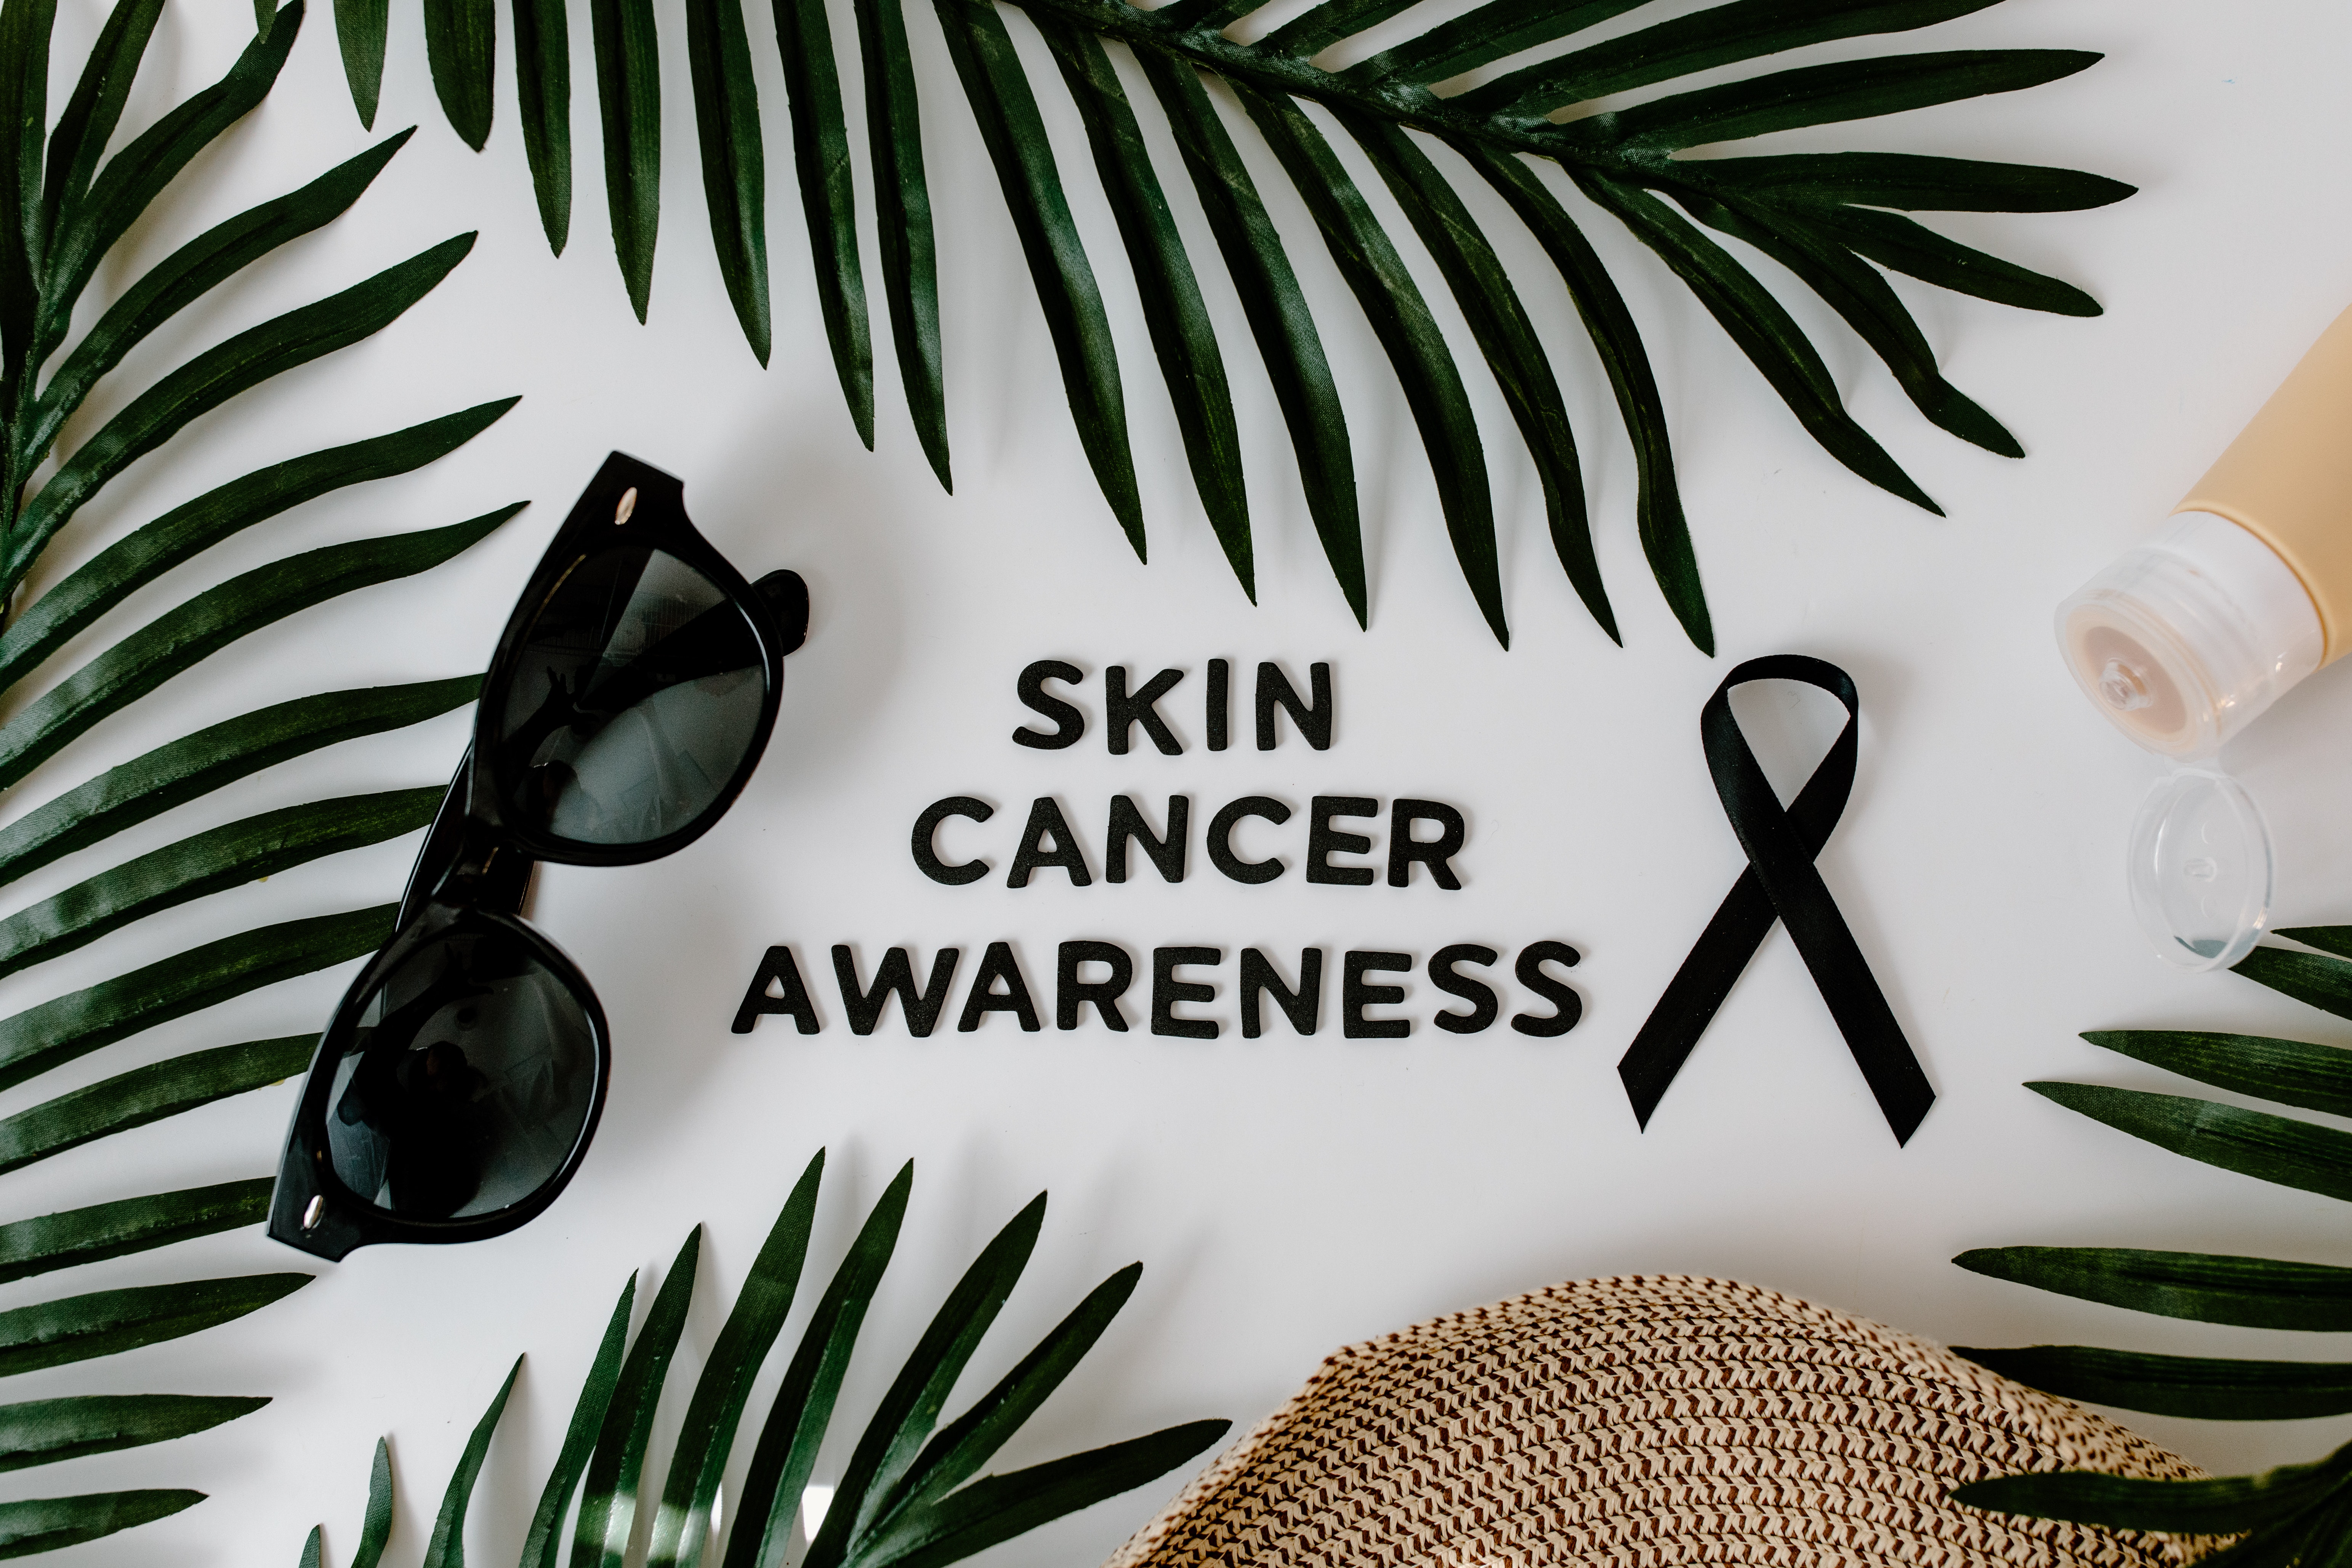 What Is Skin Cancer Awareness Month?